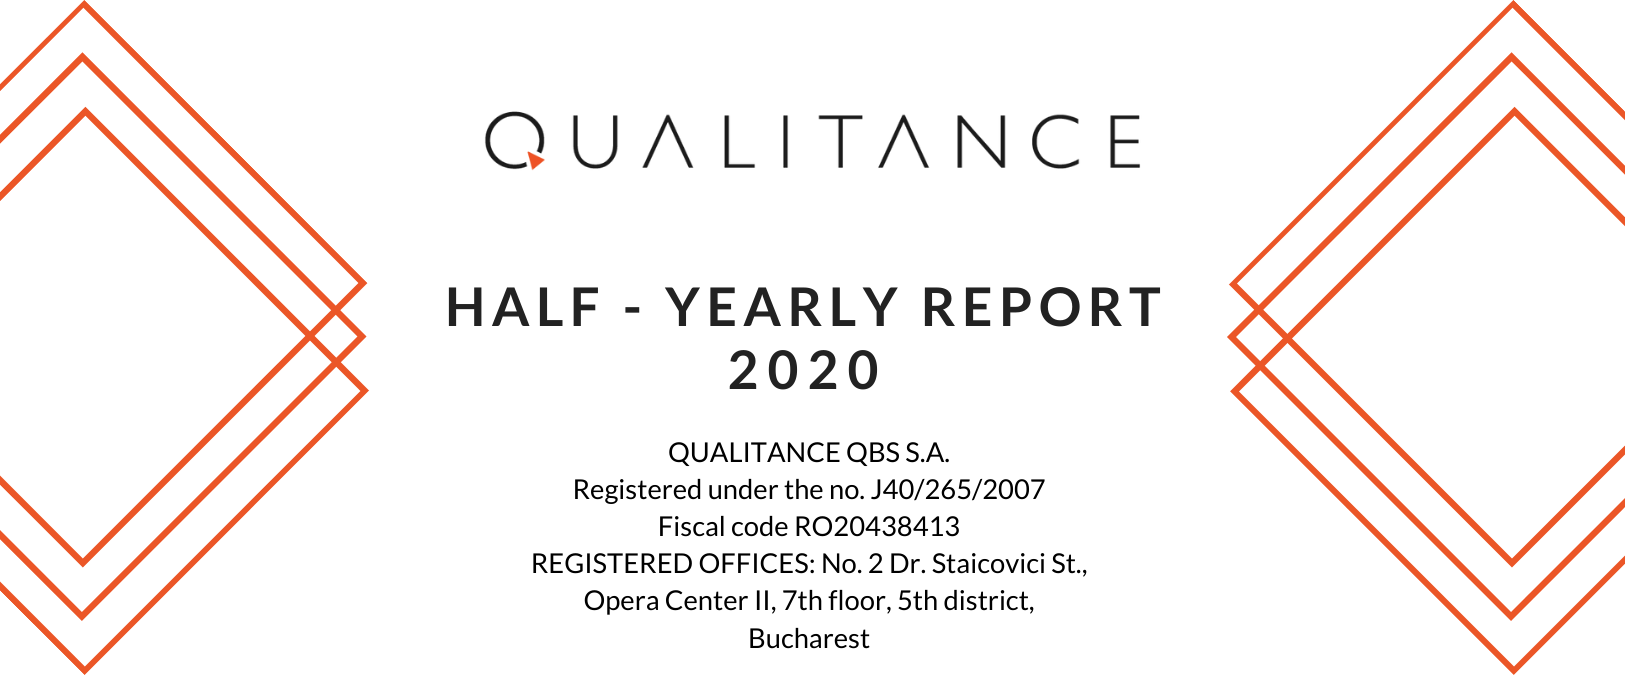 QUALITANCE 2020 Half-Yearly Report